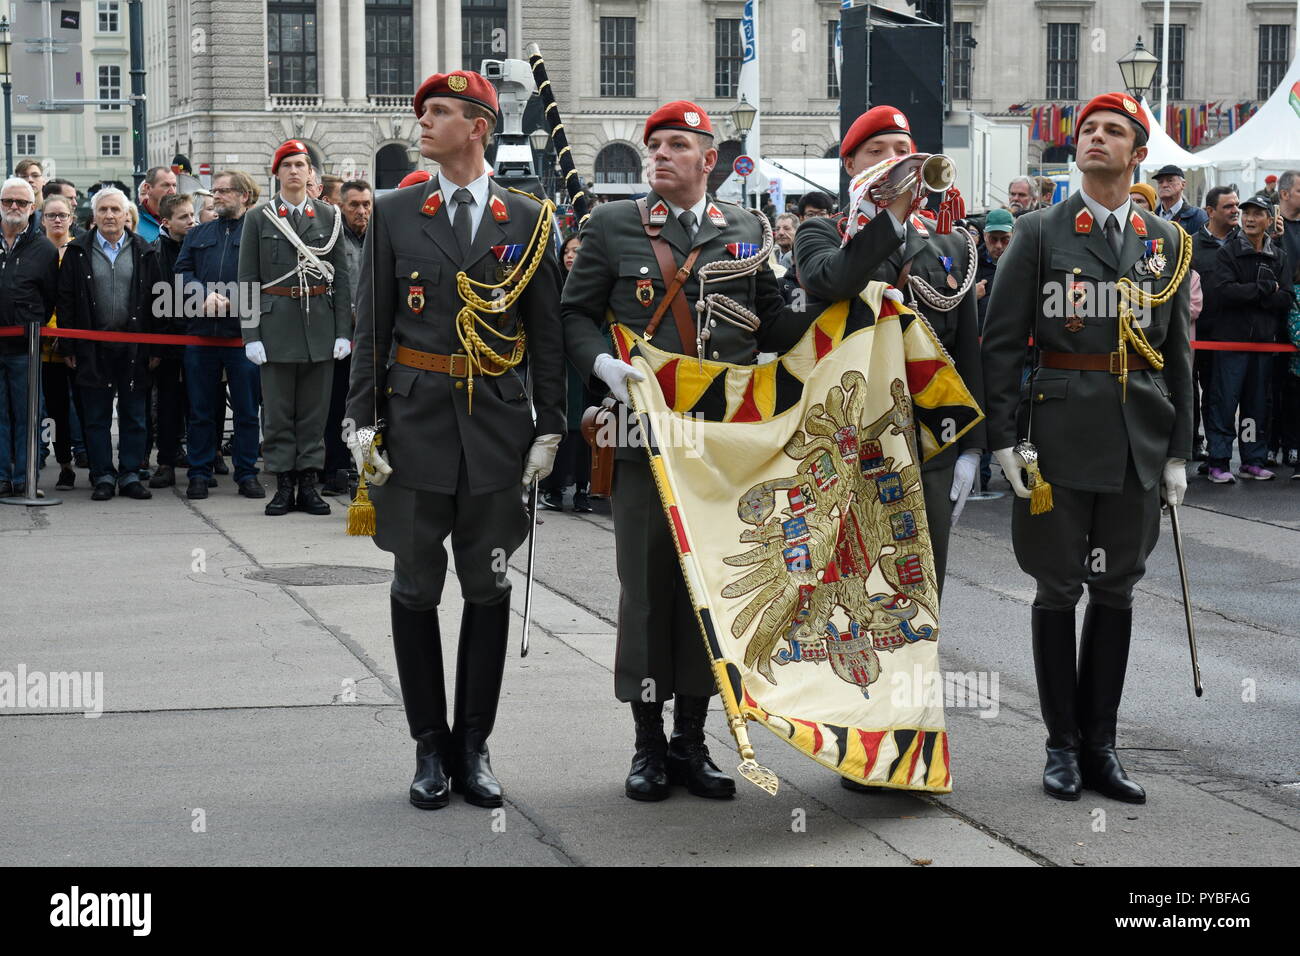 Vienna, Austria. 26 October 2018. Performance show of the Austrian Armed Forces on the national holiday in Vienna at the Heroes Square. Credit: Franz Perc/Alamy Live News Stock Photo